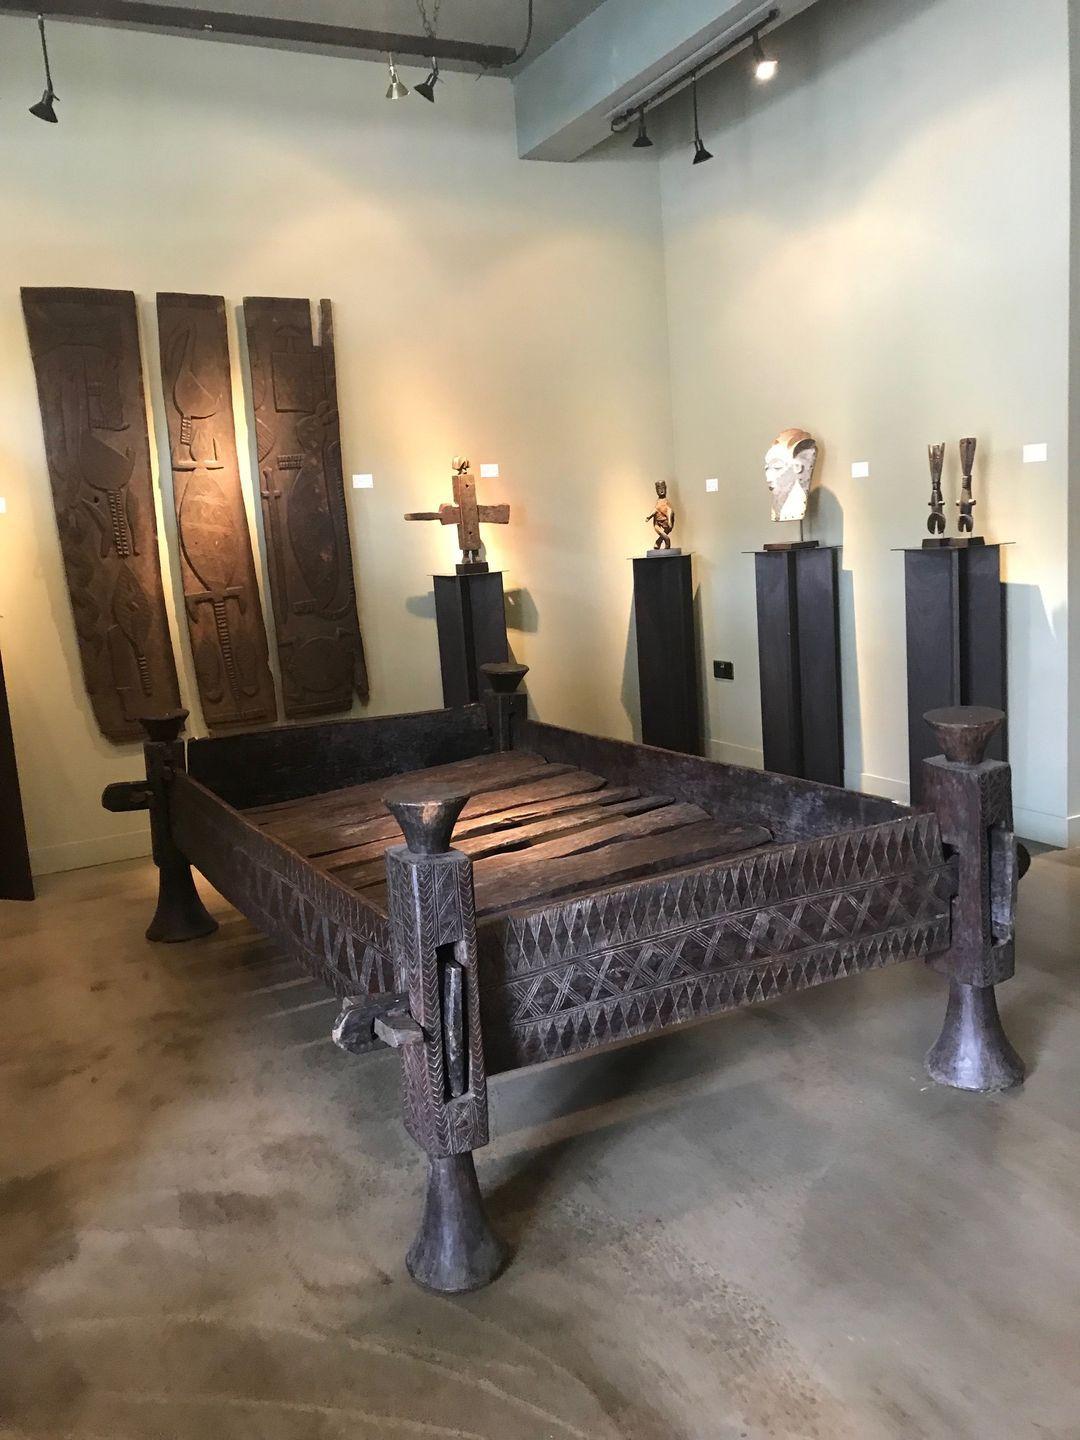 This amazing nineteenth-century Ethiopian bed, personally collected in Ethiopia in the 1990's, formally belonged to the collection of Tekalegn Besapa, in Addis Ababa. This type of bed is rare to find in Ethiopia, and would only have been used by